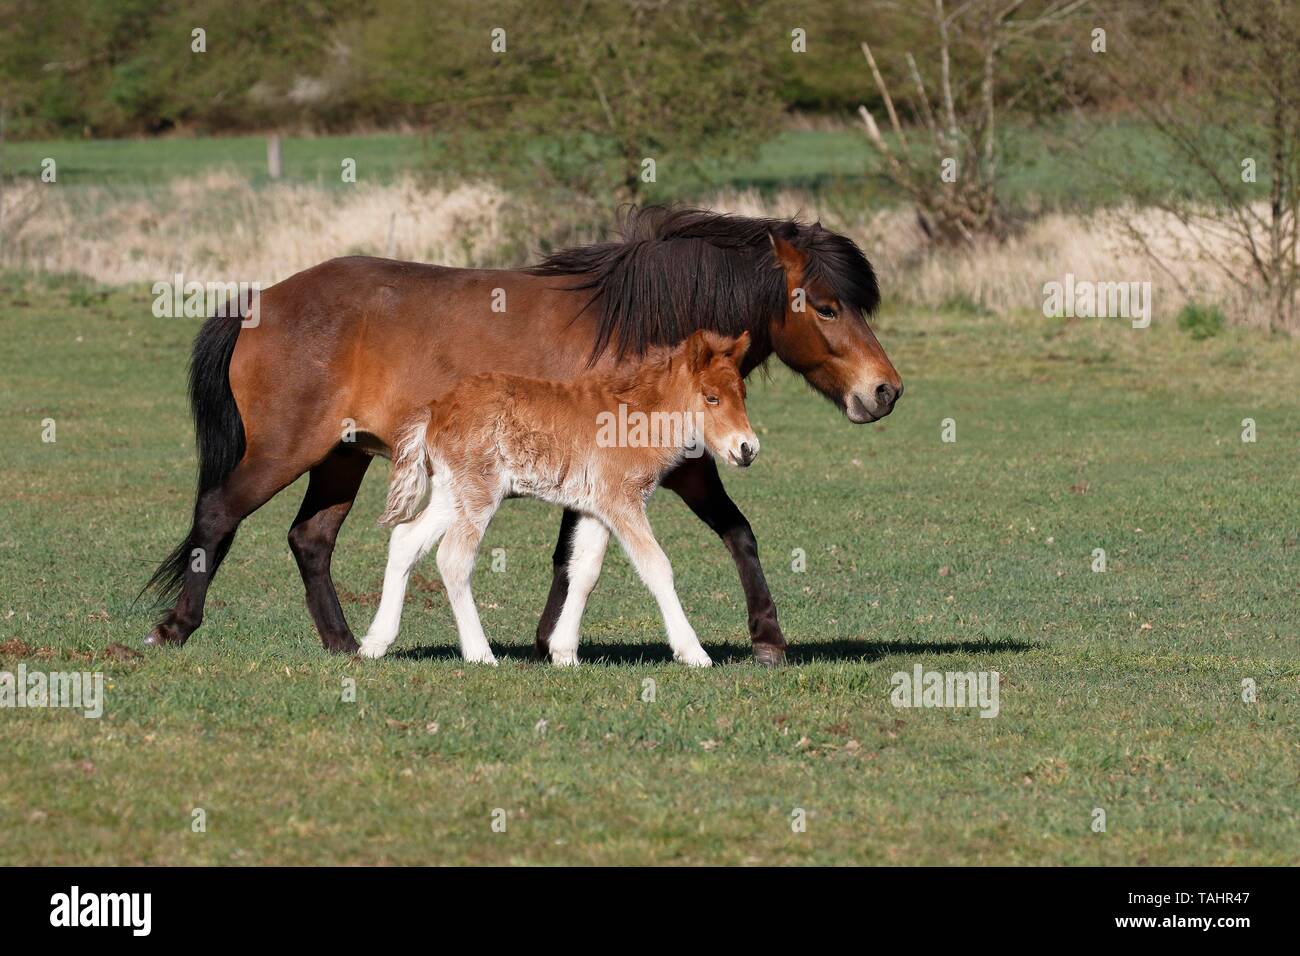 Icelandic horses (Equus ferus caballus), mare with foal running side by side, Schleswig-Holstein, Germany Stock Photo